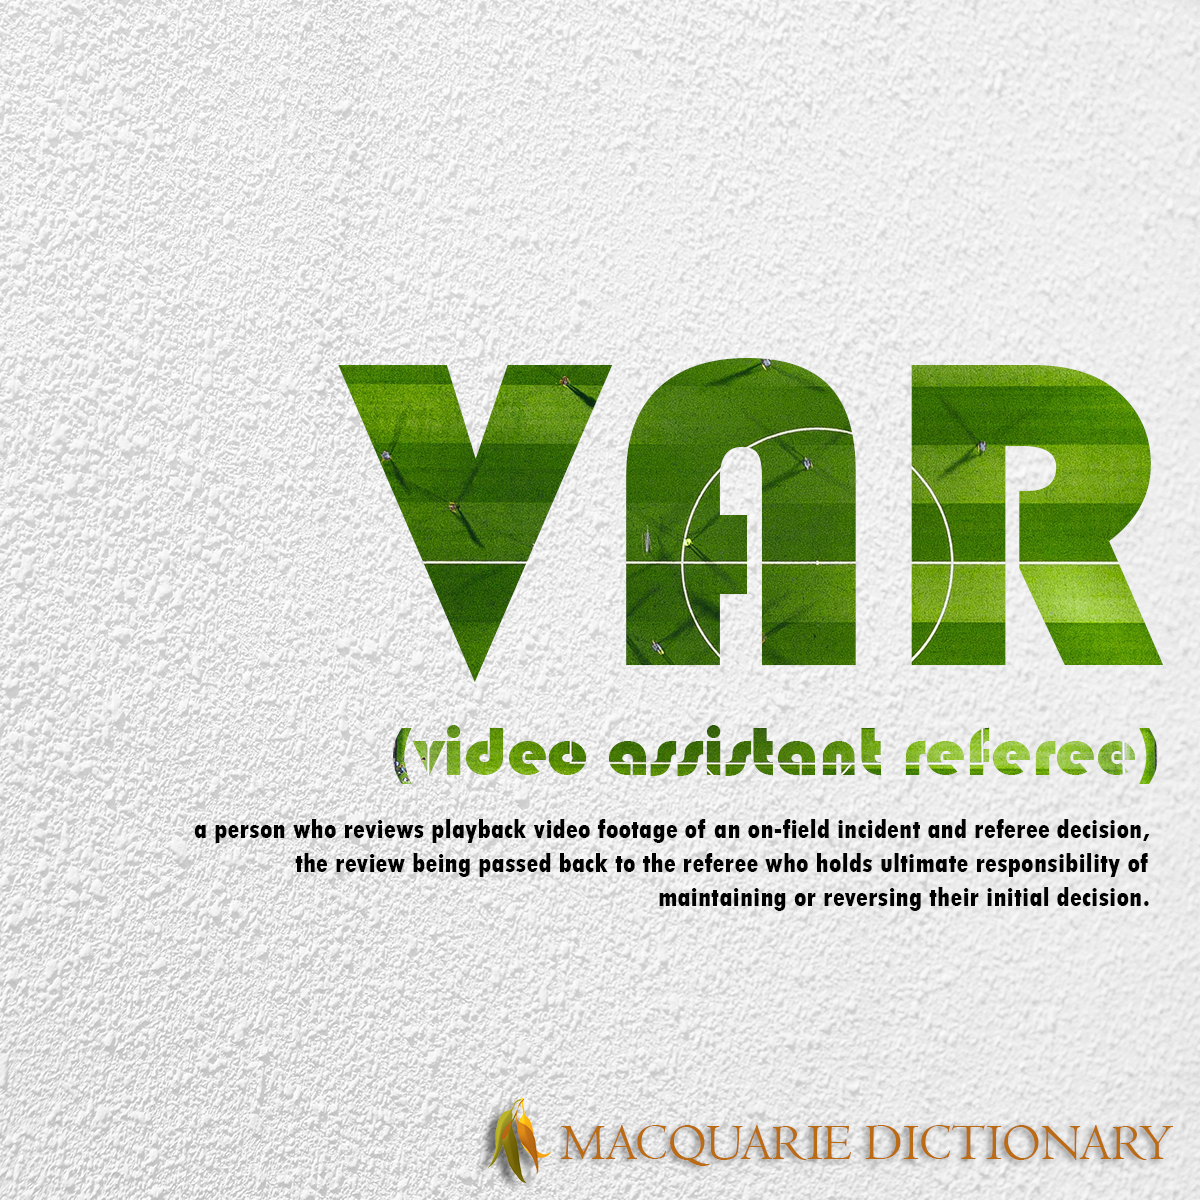 Image of Macquarie Dictionary Word of the Year - VAR - a person who reviews video footage of an on-field incident that resulted in a referee decision, the review being passed back to the referee who holds ultimate responsibility for maintaining or reversing their initial decision.